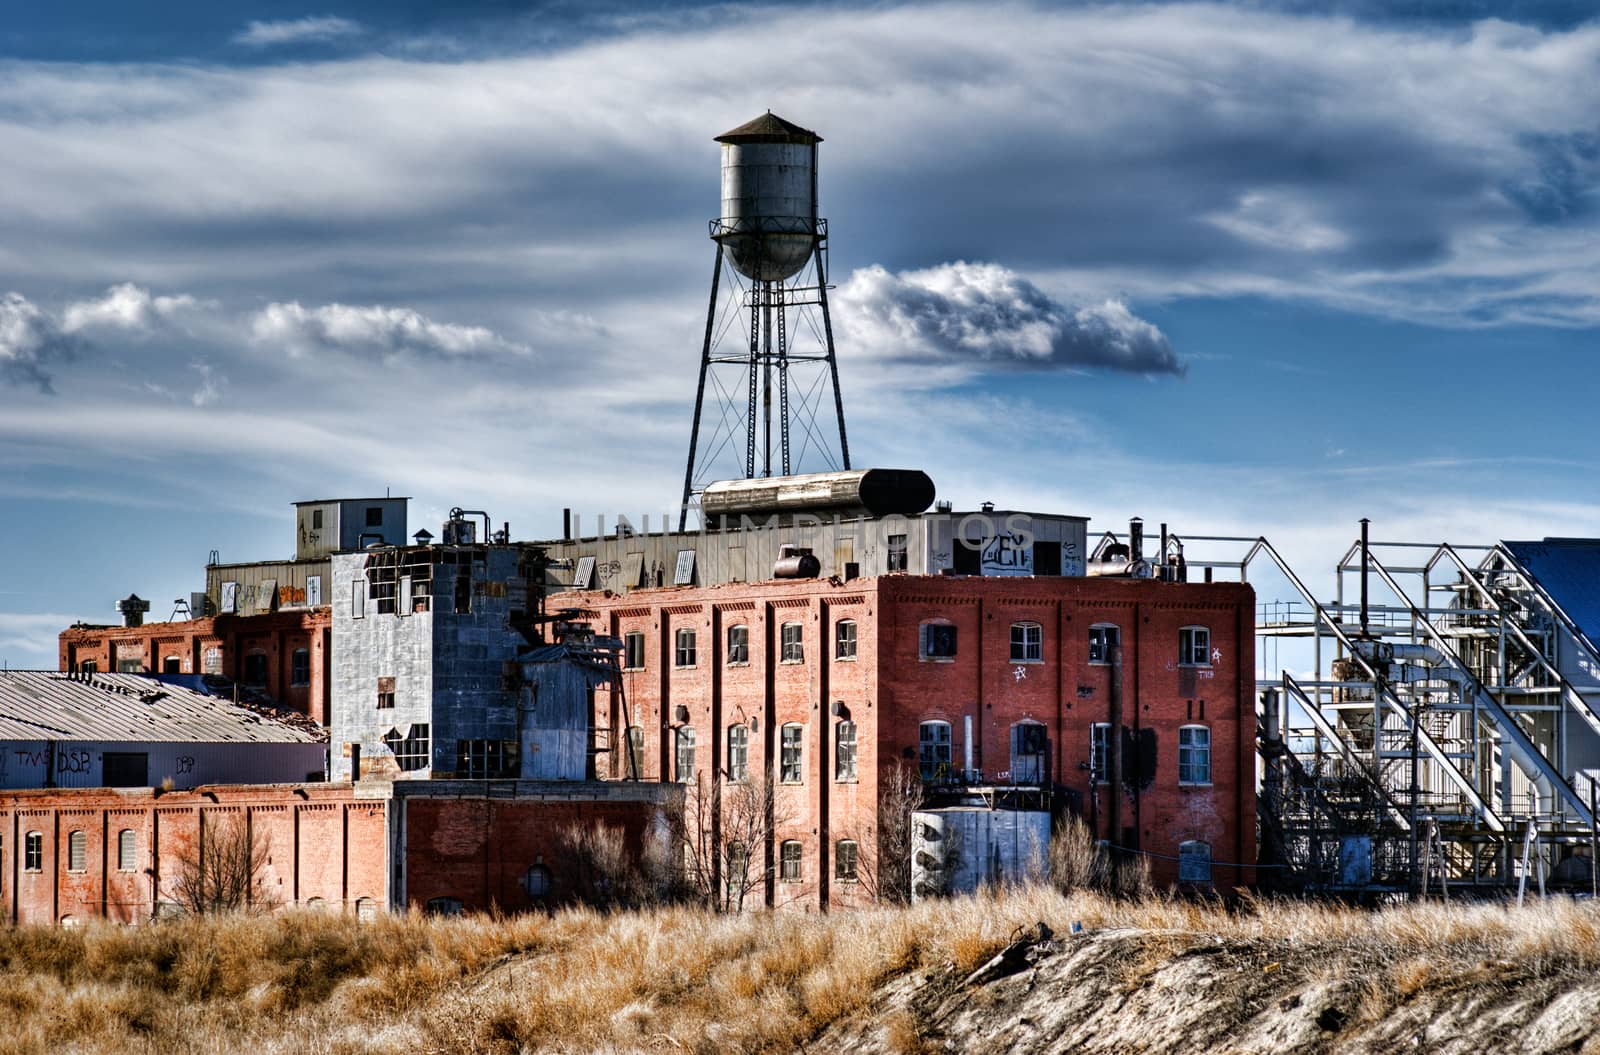 Abandoned sugar mill in a small rual Colorado town against a stormy sky.